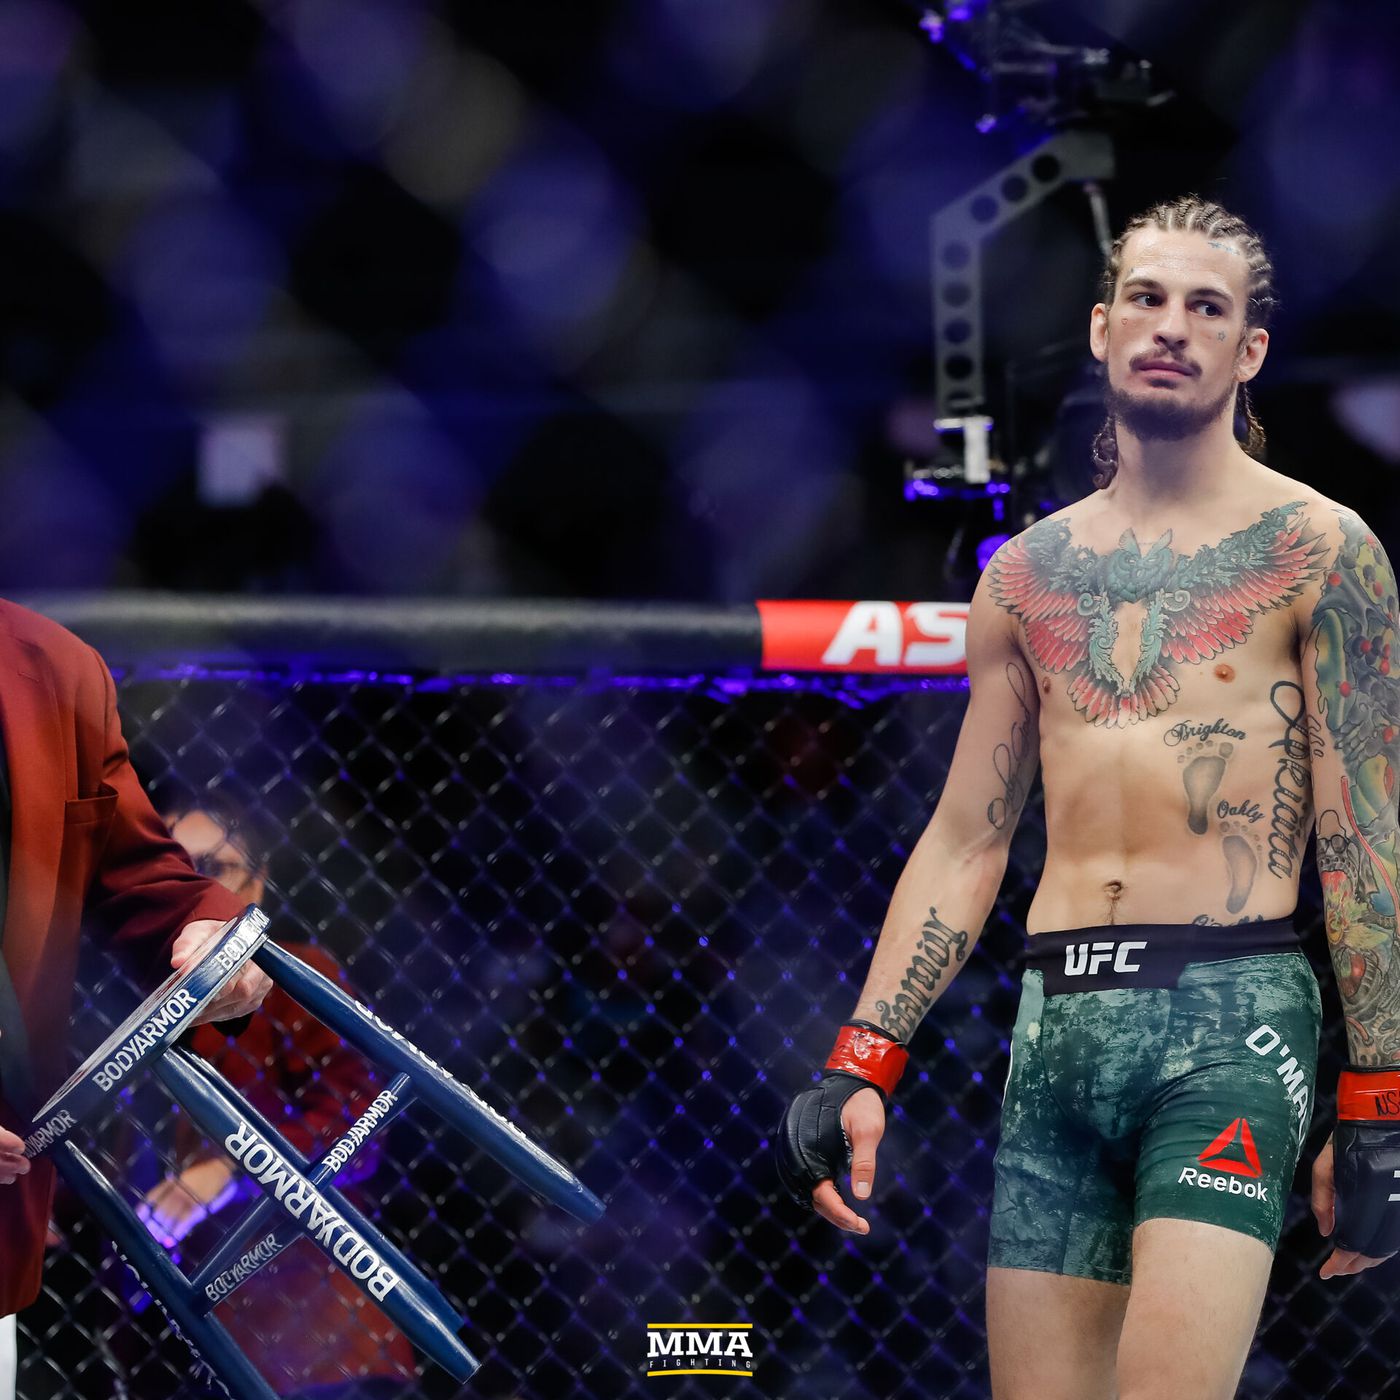 Morning Report: Sean O'Malley criticizes the UFC: 'Why do they have a problem paying someone what they're worth?'